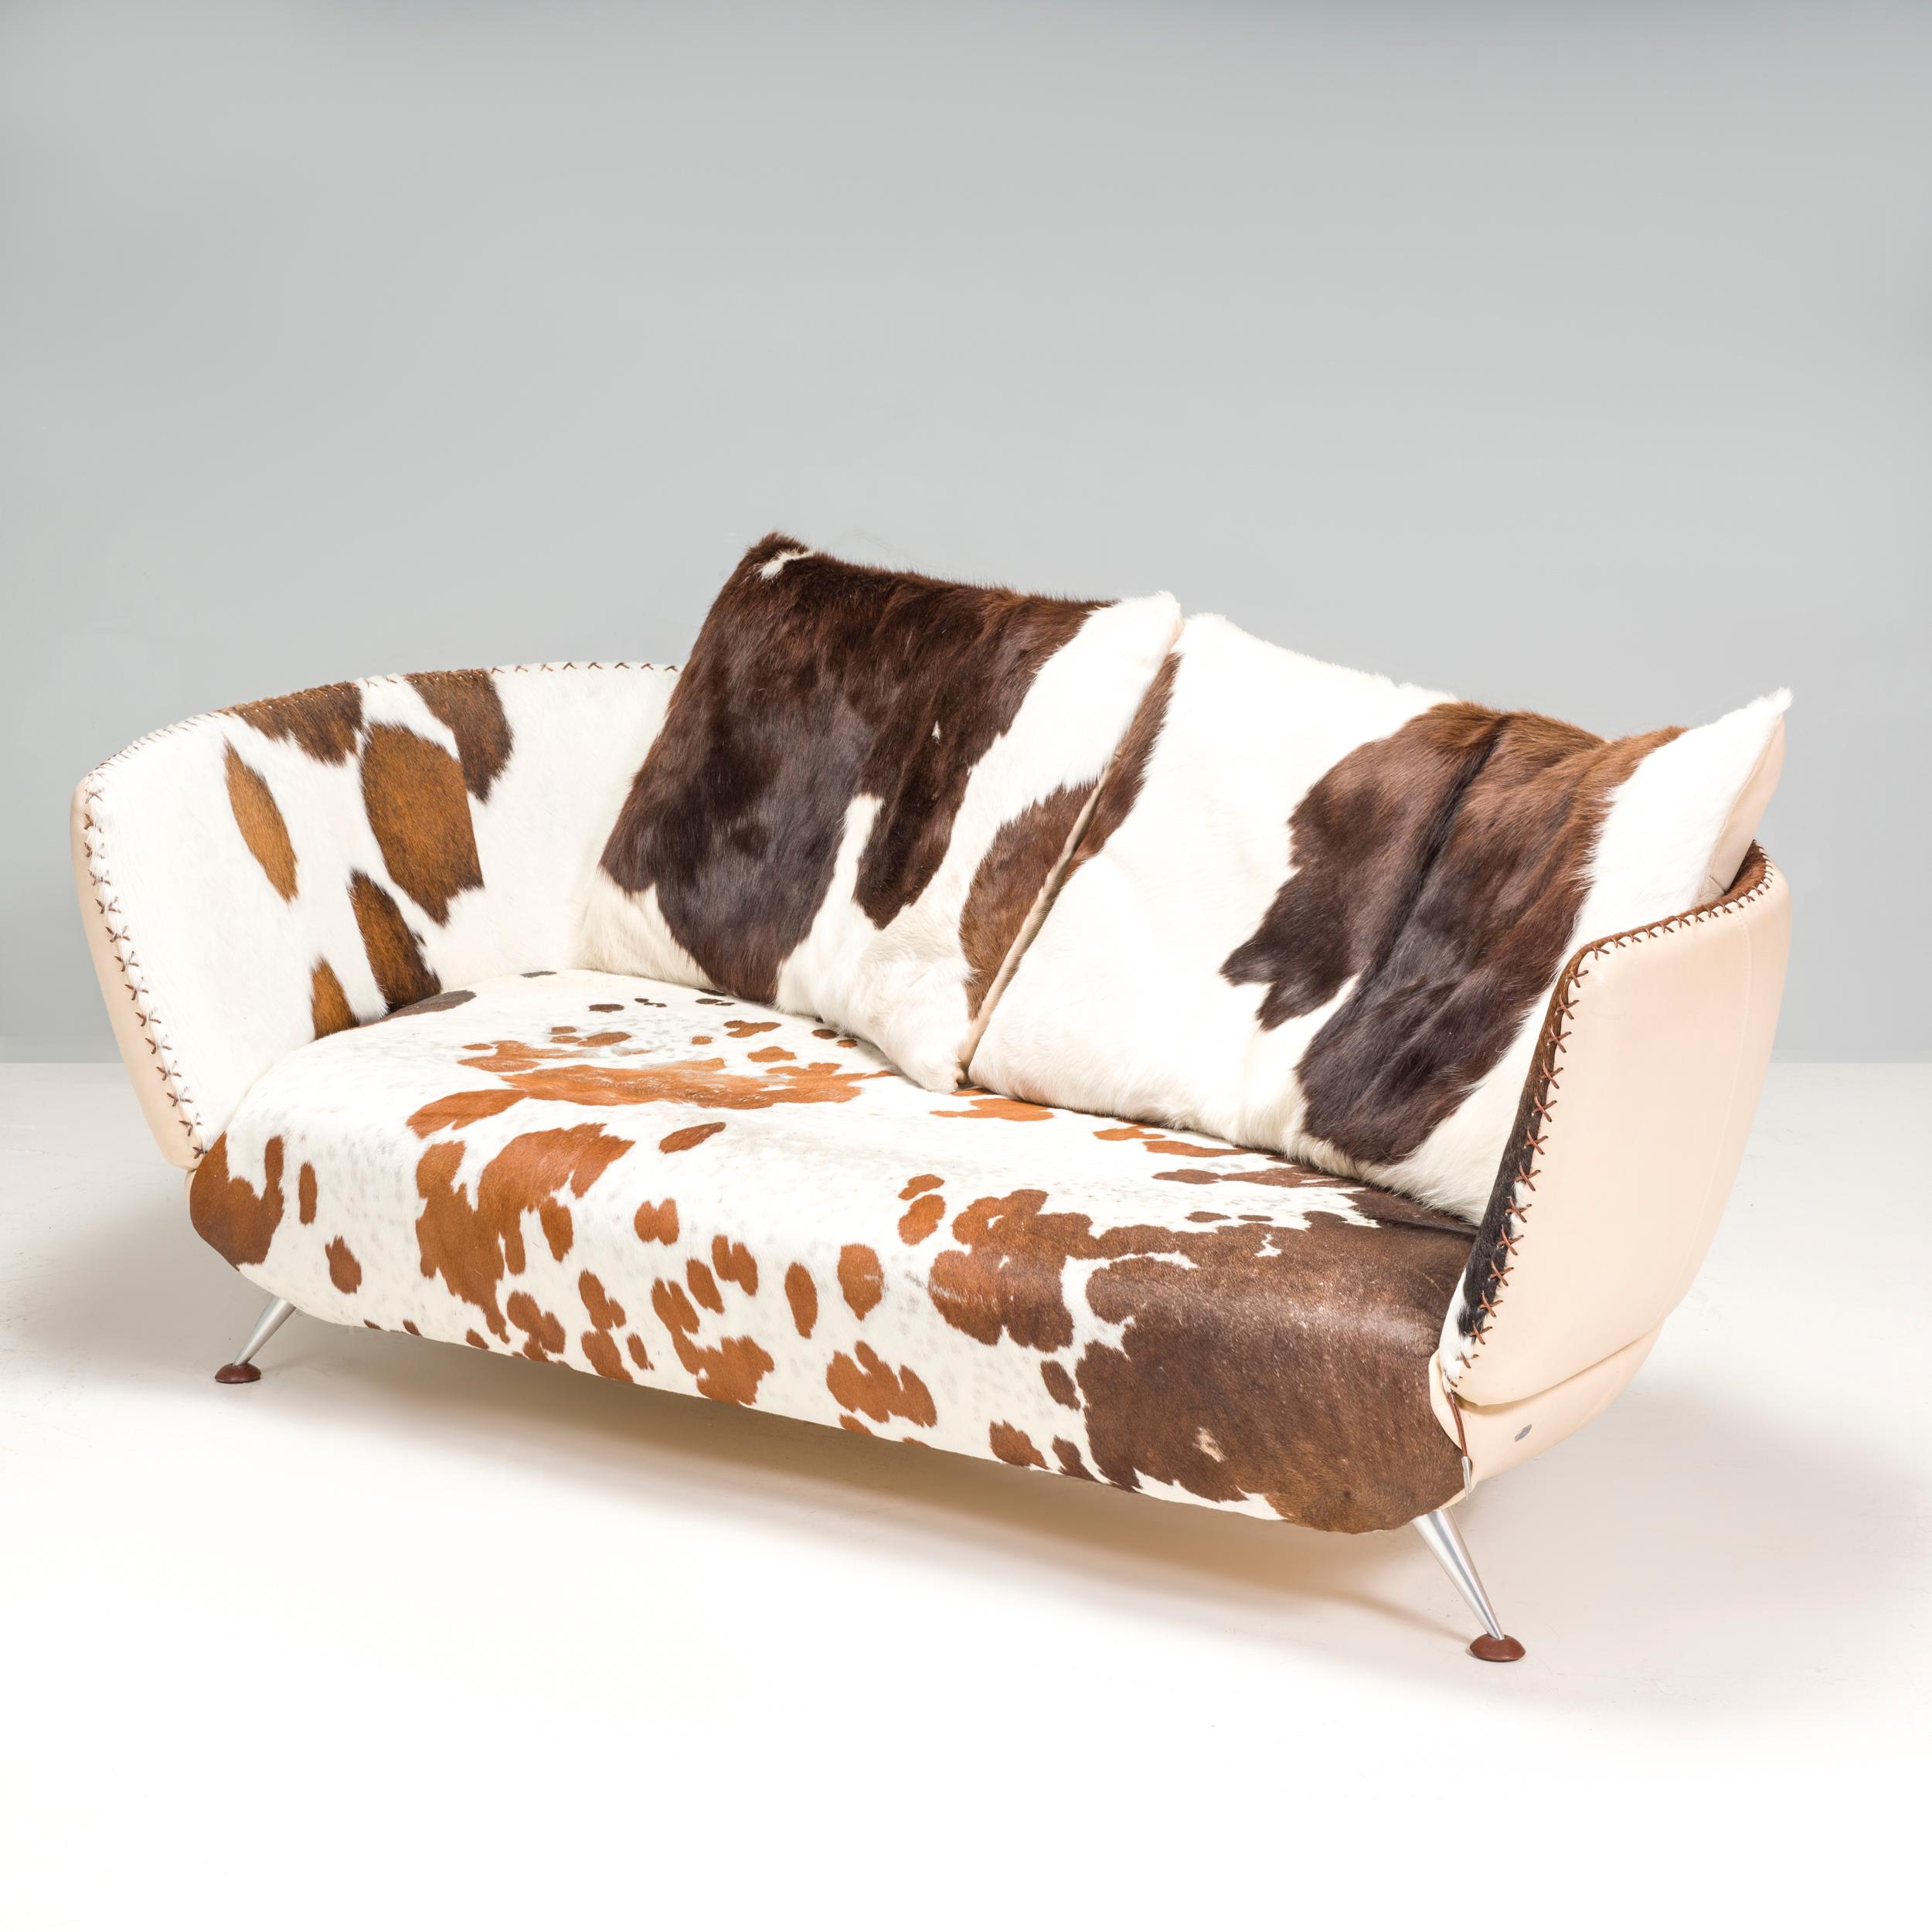 Designed by Mathias Hoffman for De Sede, the De Sede DS-102 is a three seater sofa featuring a beautiful pony hide spotted in an array of shades. The cream leather backing to the sofa complements the brown patterning of the hide and contributes to